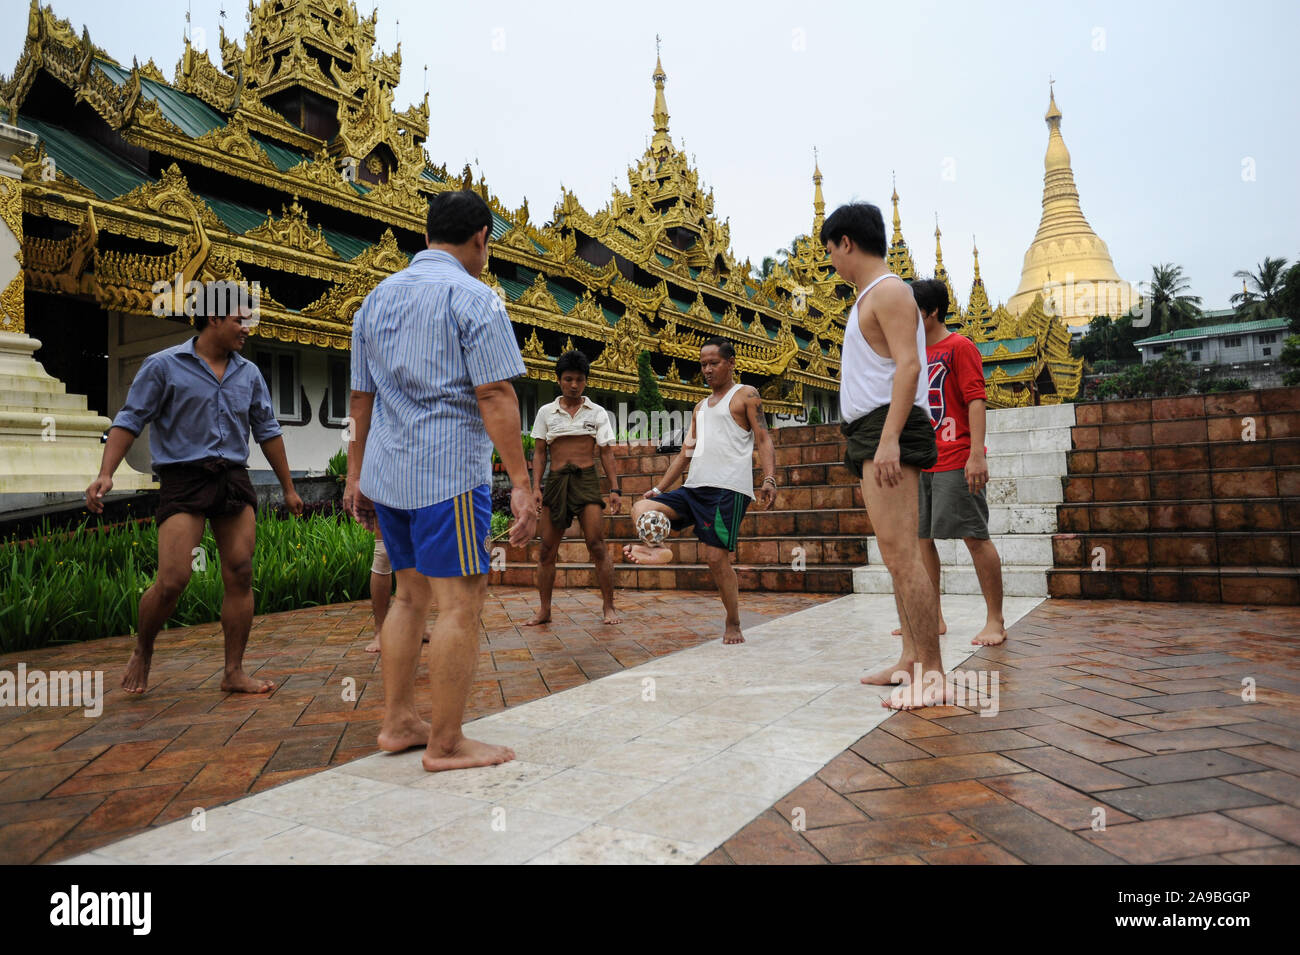 25.08.2013, Yangon, , Myanmar - A group of men plays Chinlone in front of the temple area of the Shwedagon pagoda. The game is the national sport of t Stock Photo